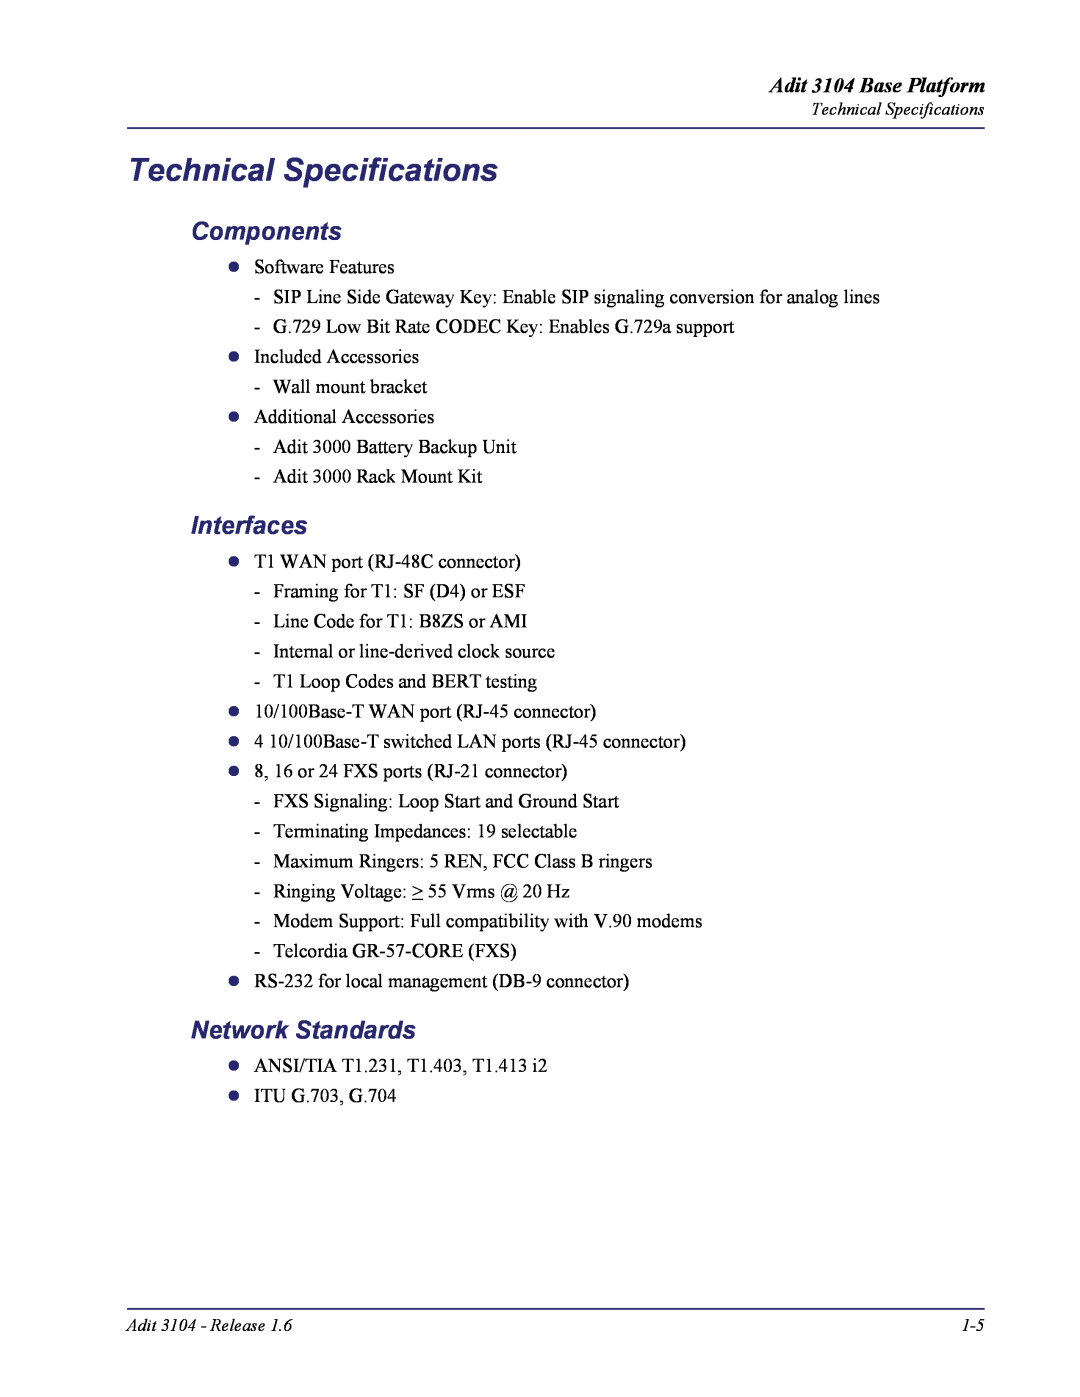 Carrier Access user manual Technical Specifications, Components, Interfaces, Network Standards, Adit 3104 Base Platform 